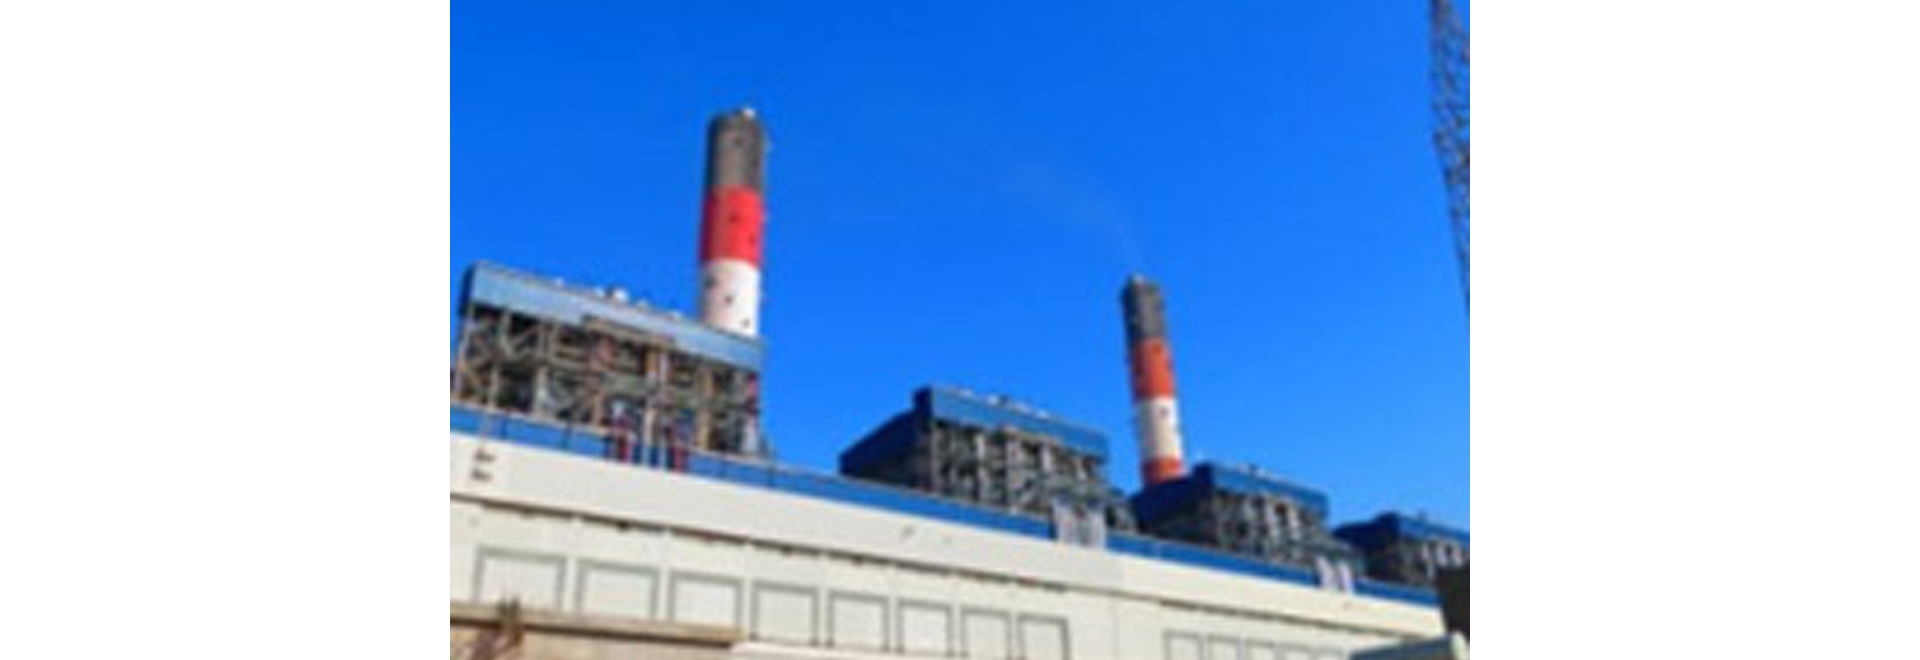 5 X 840 MW Super Critical Thermal Power Plant